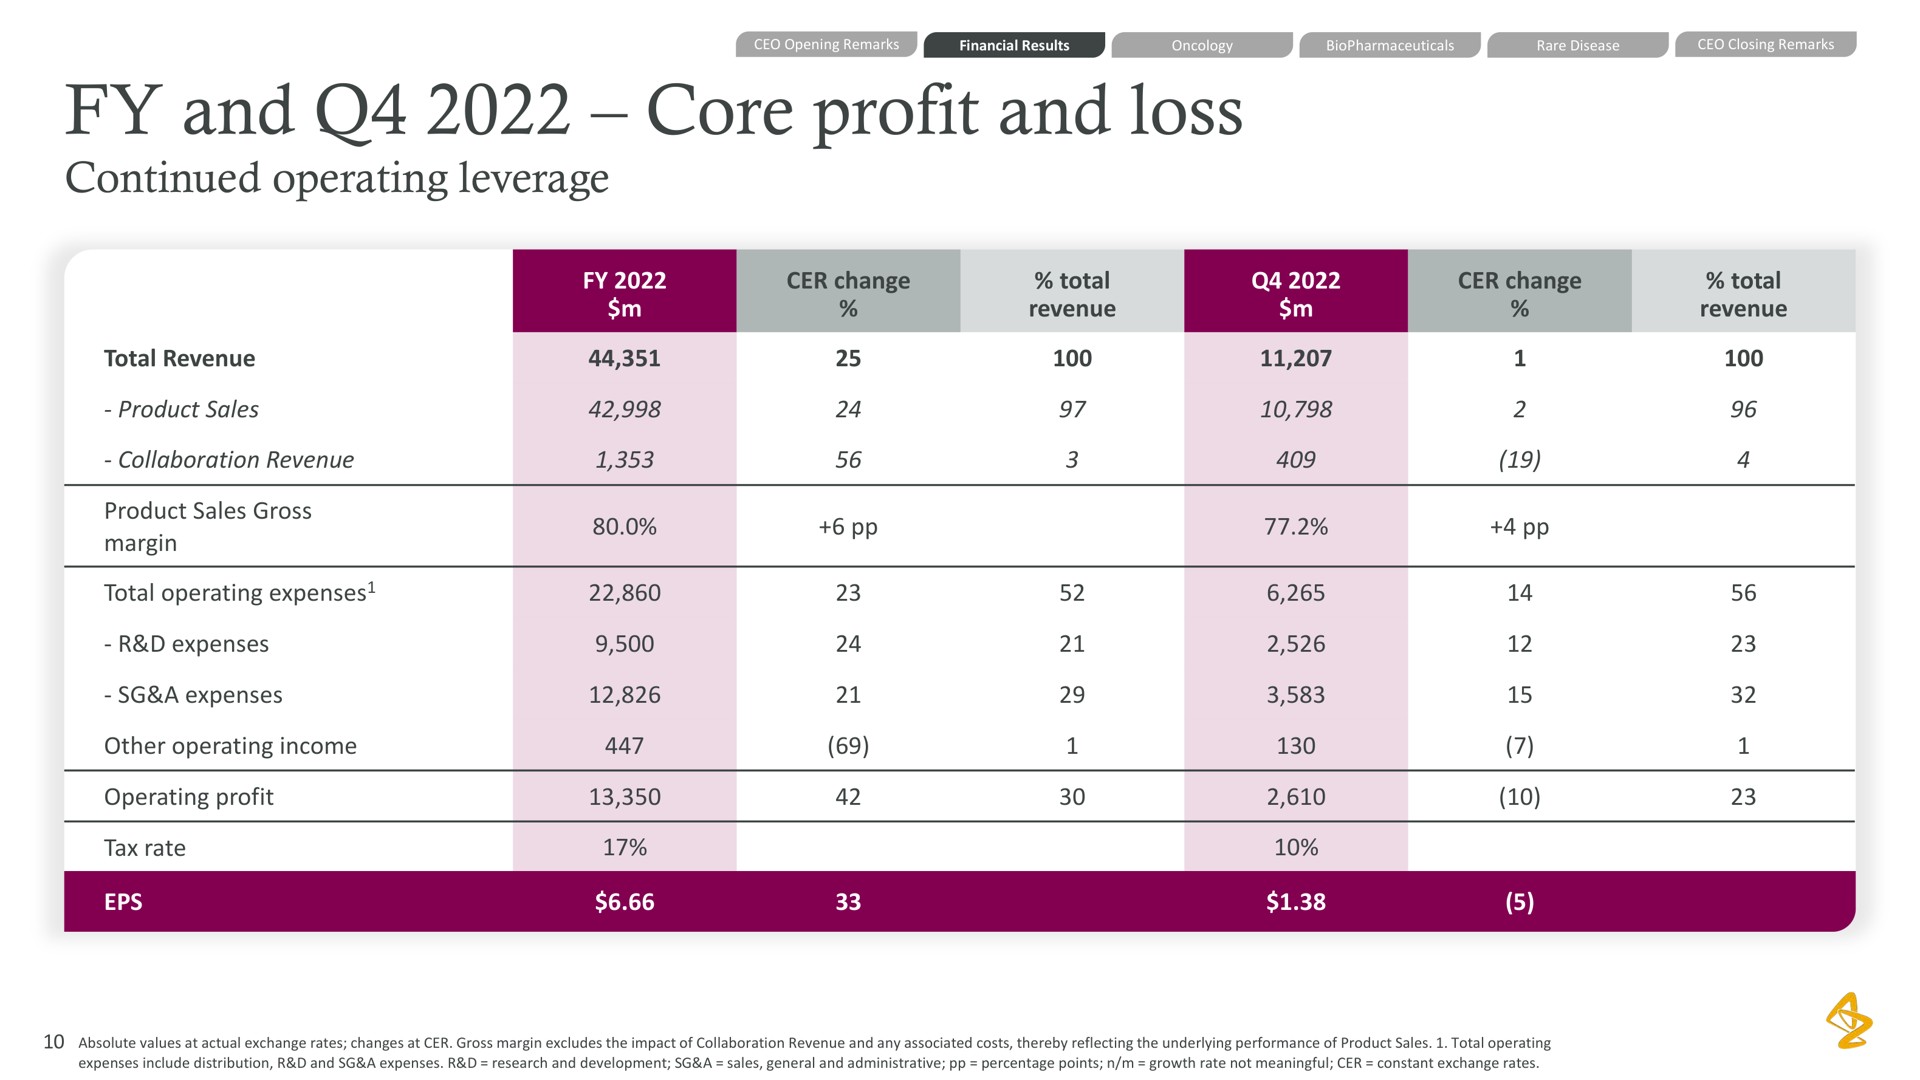 and core profit and loss continued operating leverage | AstraZeneca